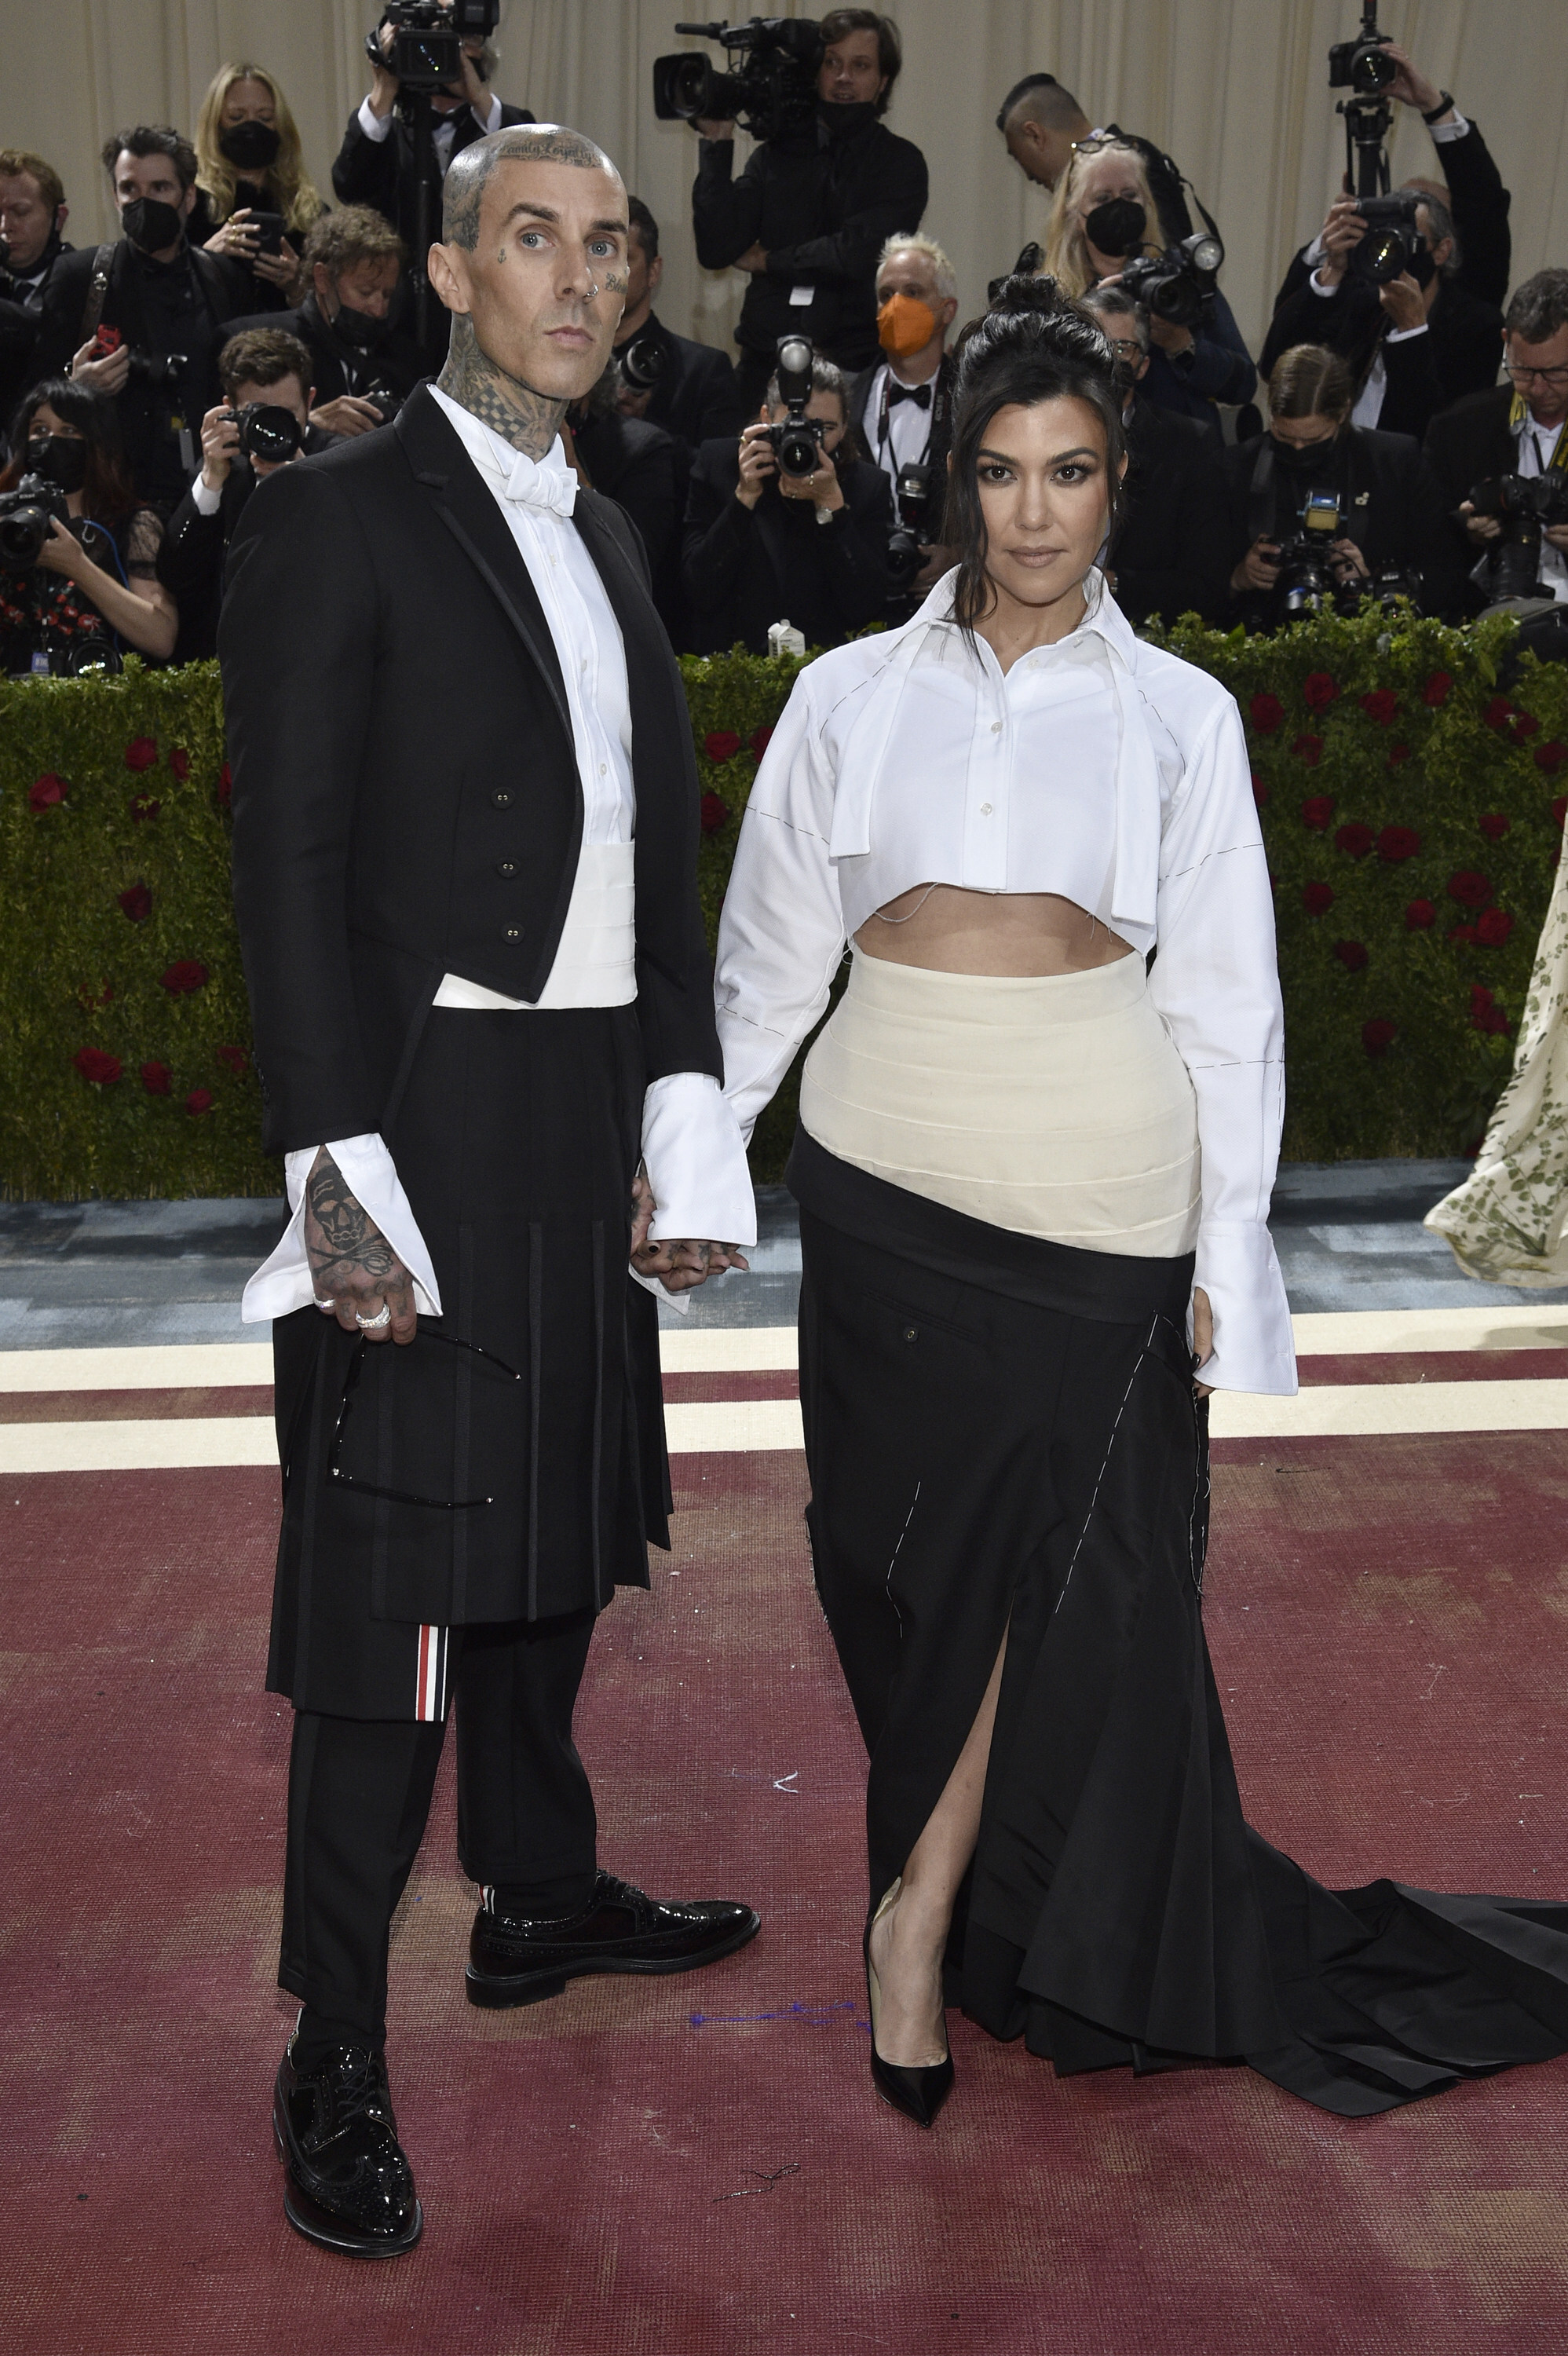 Recently married, Travis Barker and Kourtney Kardashian attended the Met Gala 2022. Photo: AP